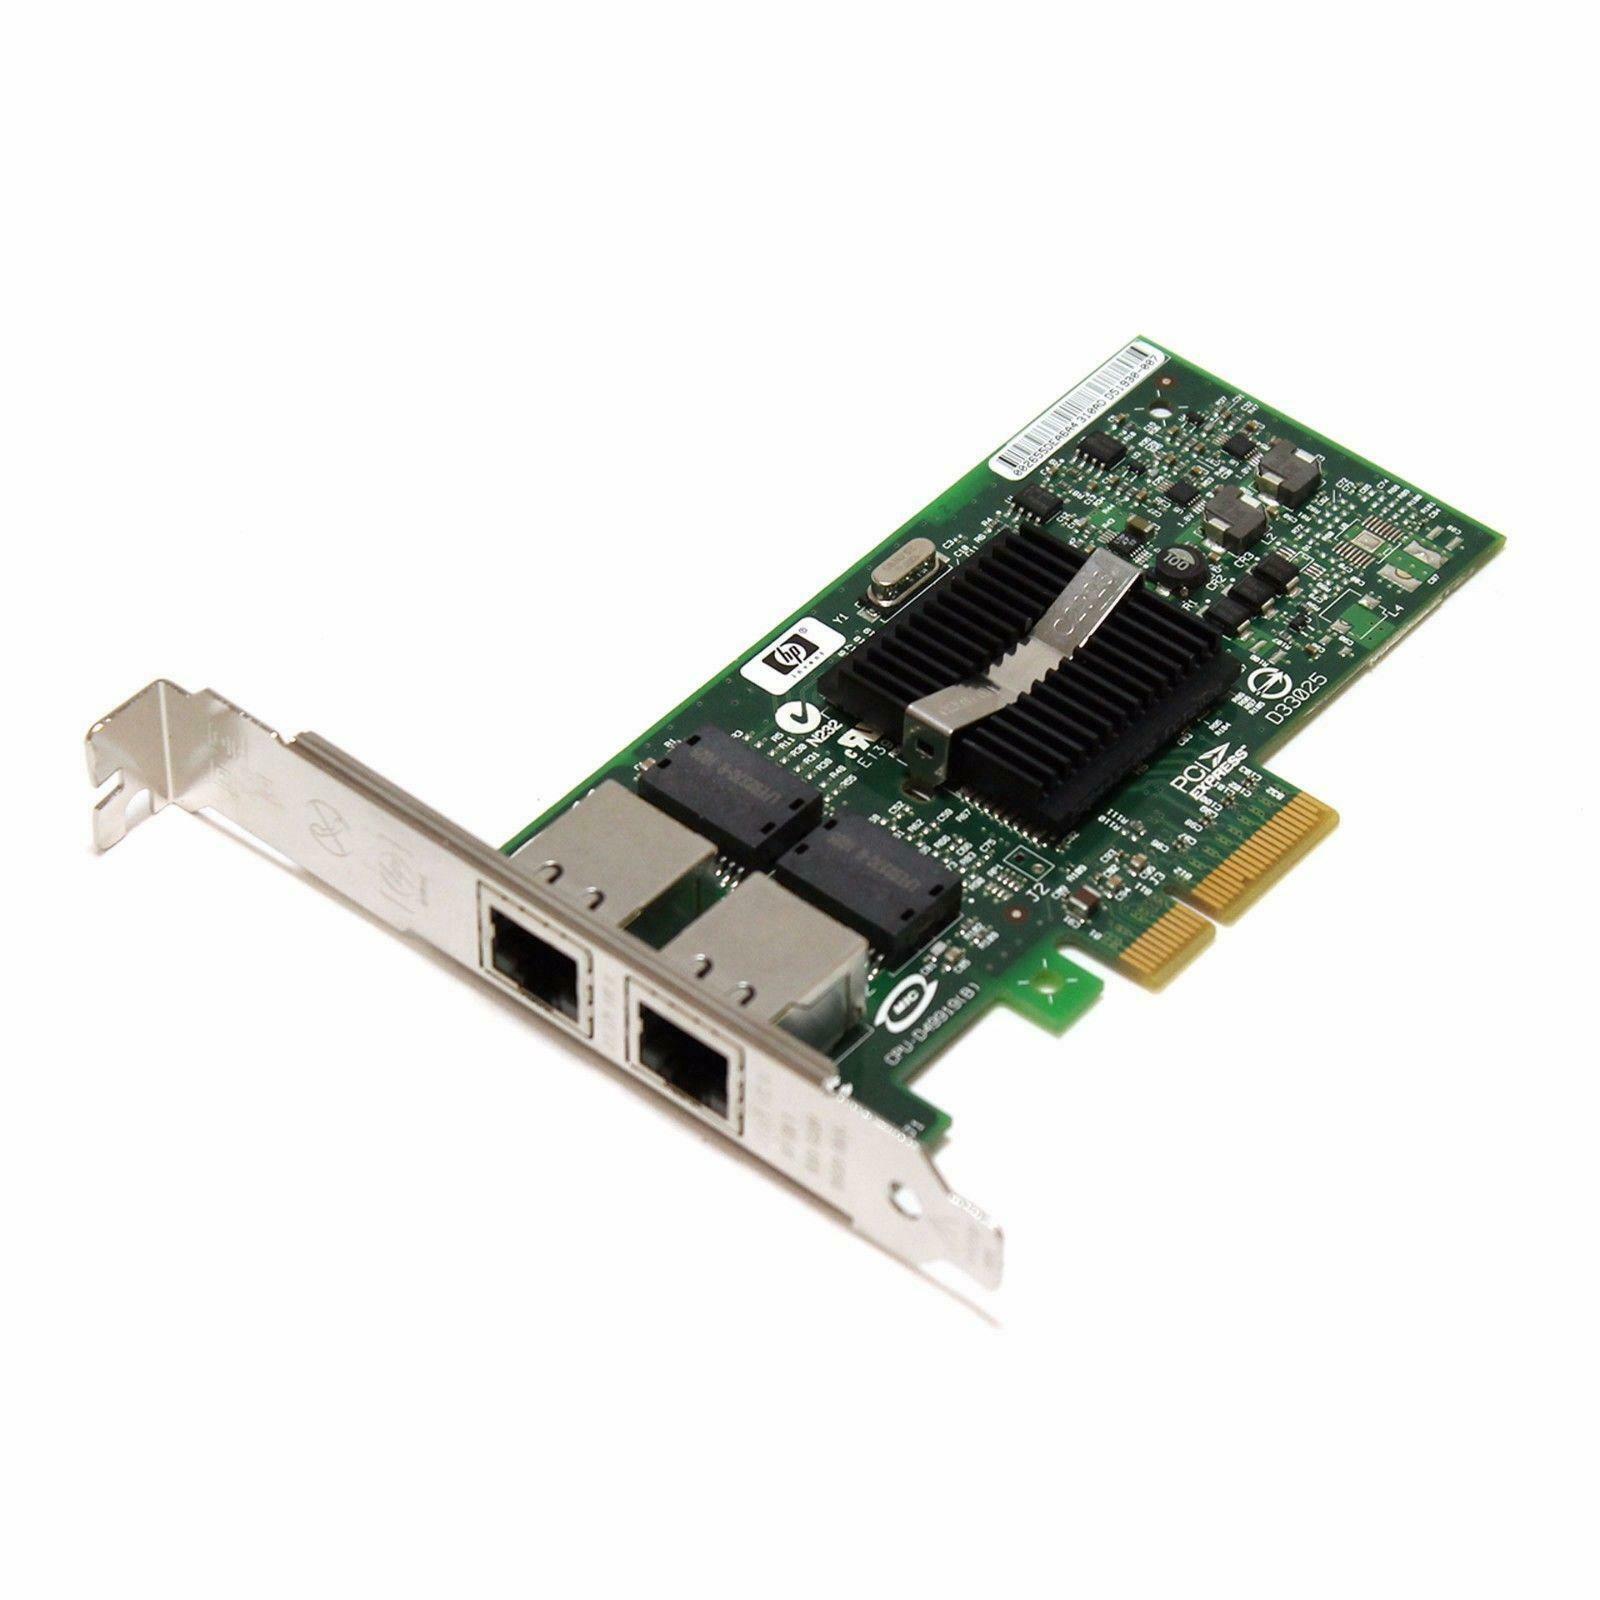 Solectron Dell PCI Ethernet NIC Card ( 721383-081 341AD 721503-005 03710T ) REF